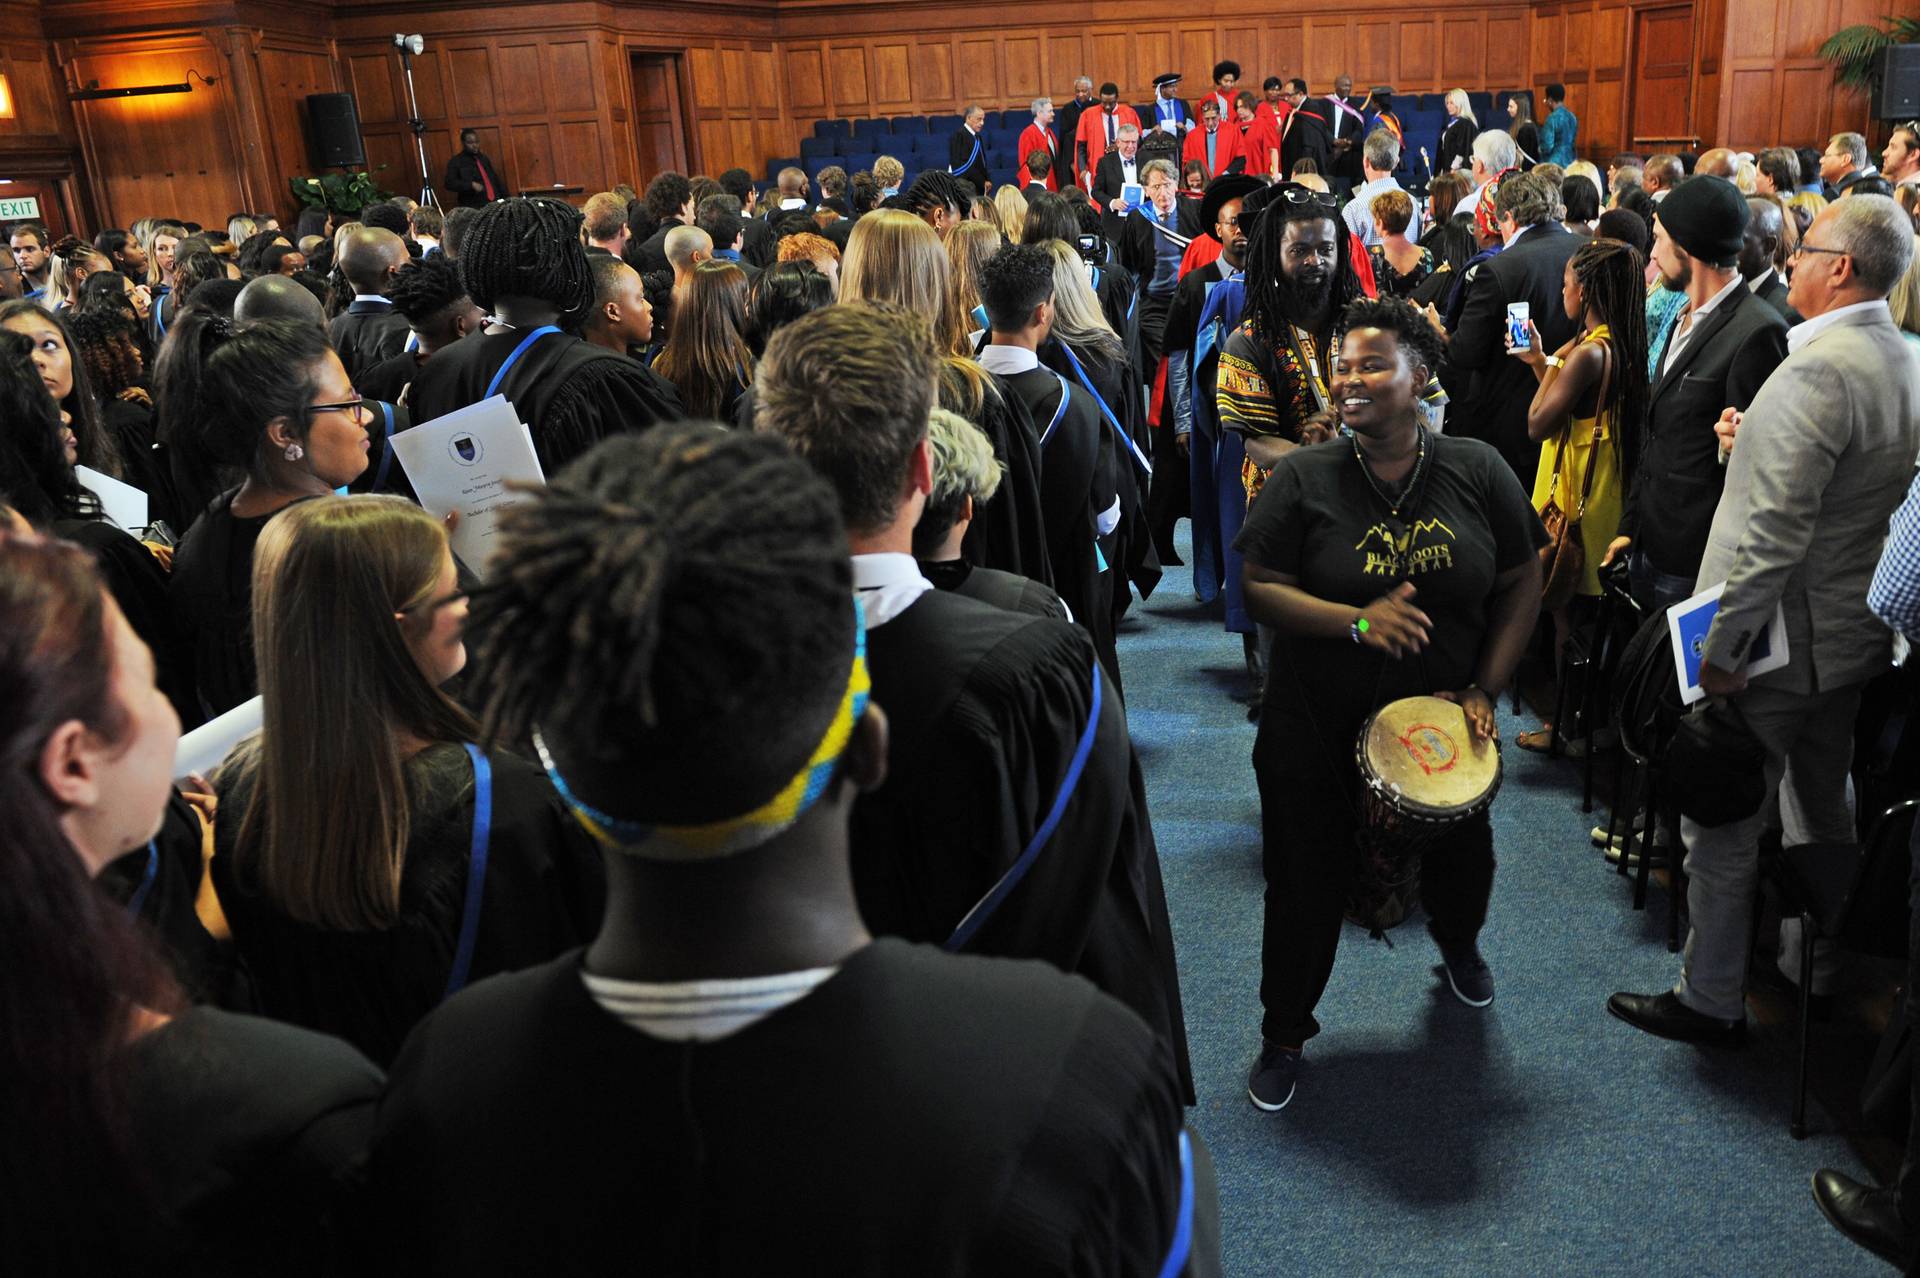 Led by Blackroots Marimba, the graduands and their guests didn't forget to have a good time.